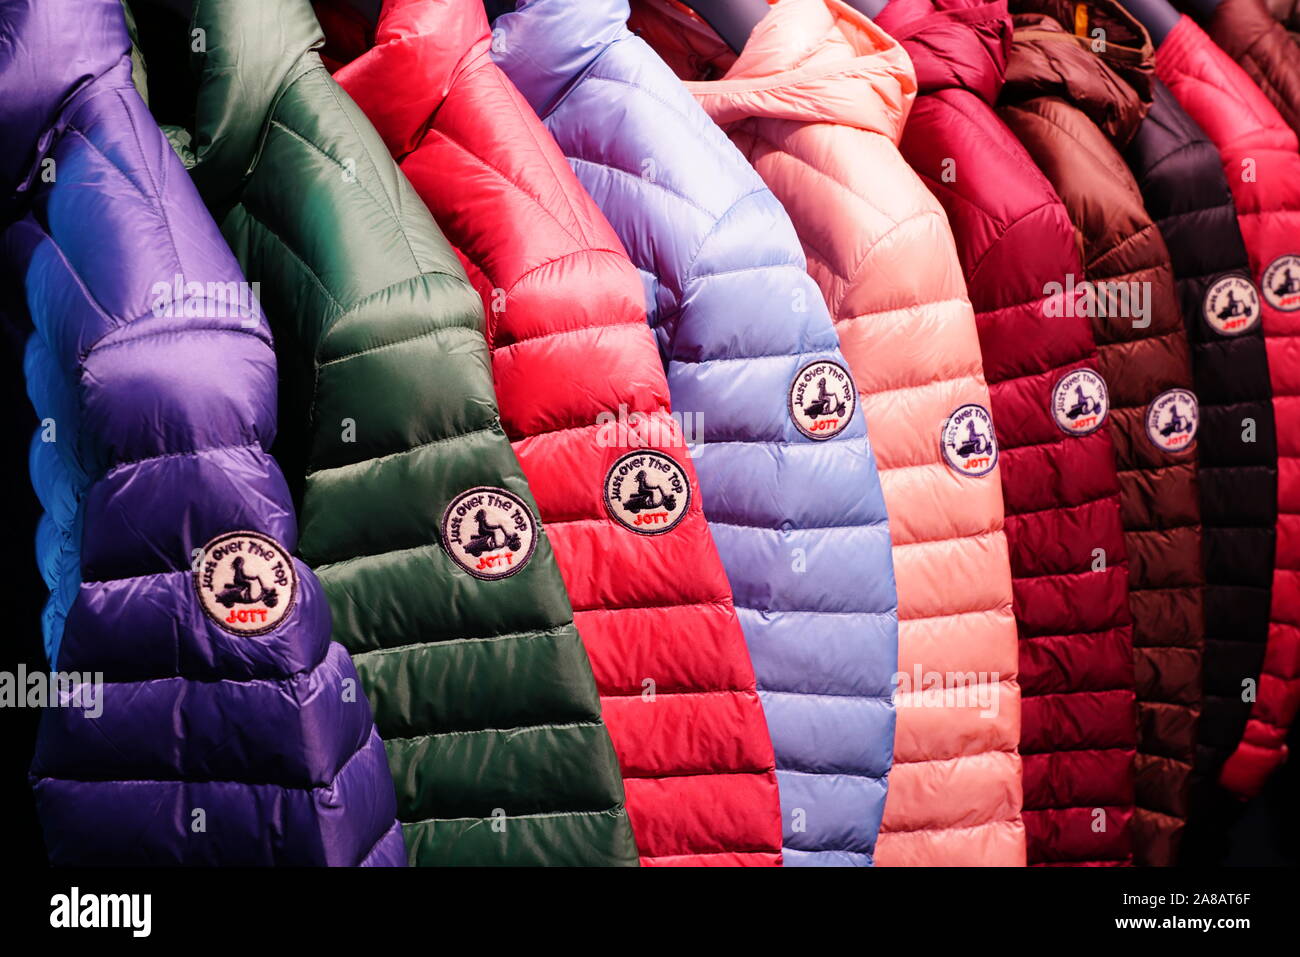 PARIS, FRANCE -22 JUL 2019- View of colorful down jackets in a Just Over  the Top (JOTT) clothing store Stock Photo - Alamy